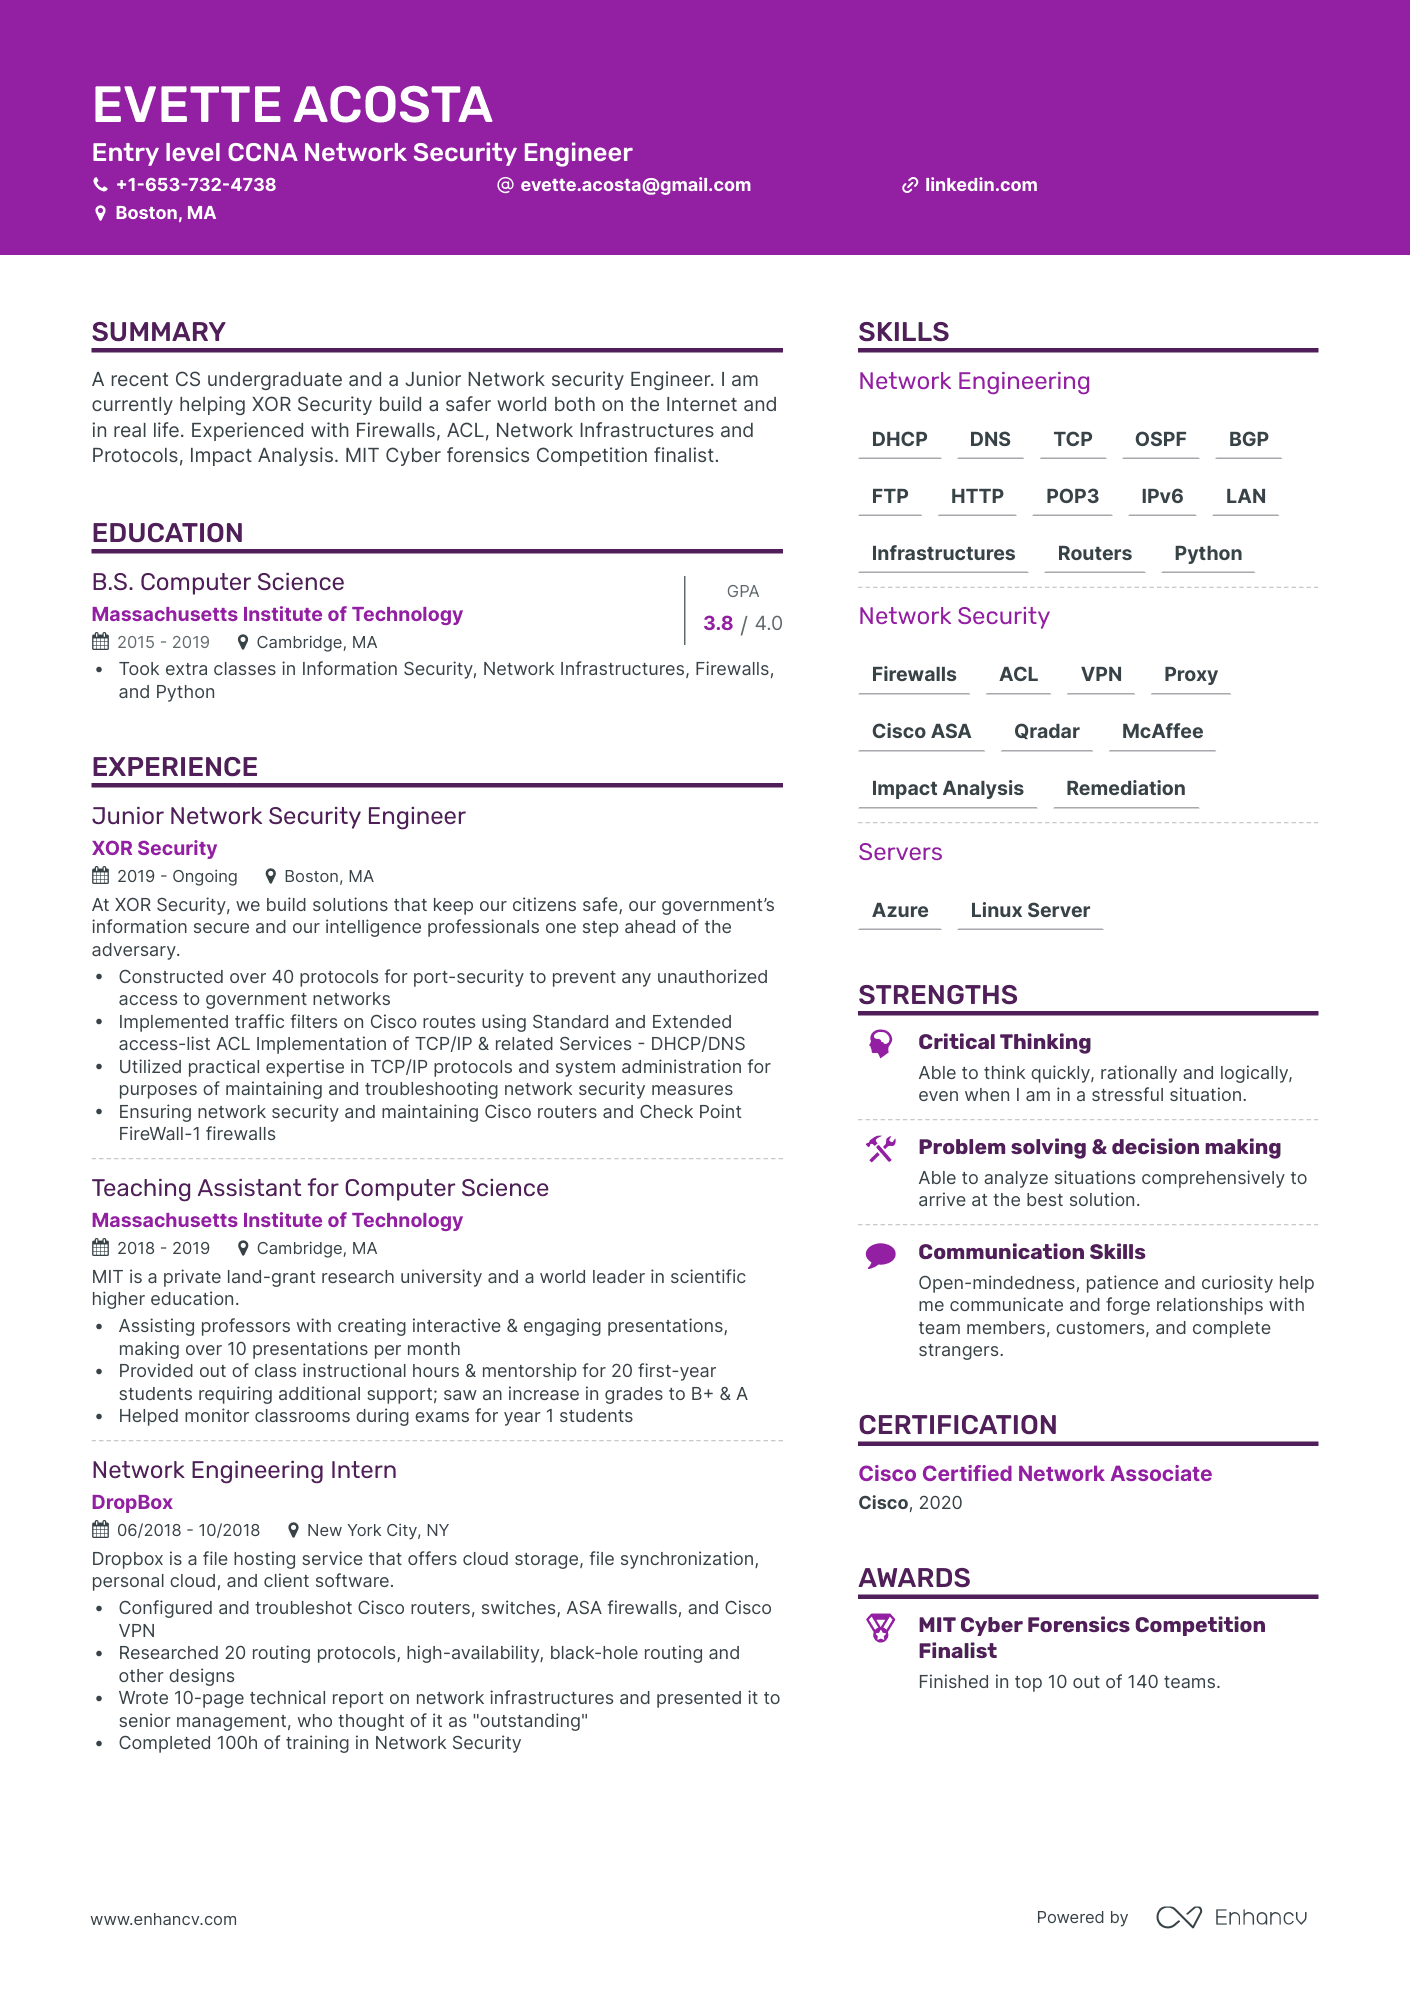 how to make a good computer science resume